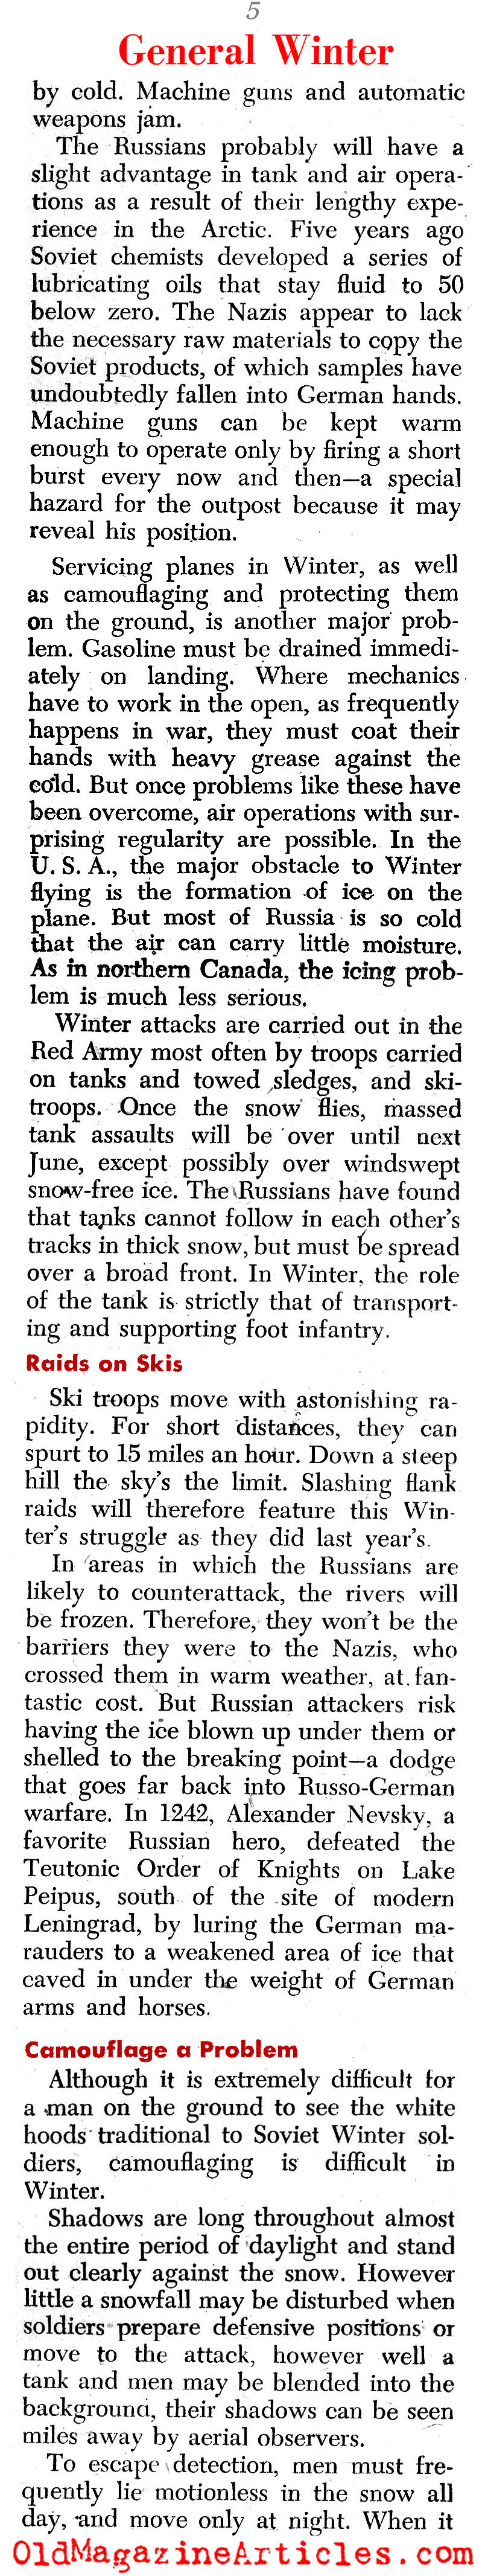 Fighting in Winter (PM Tabloid, 1942)